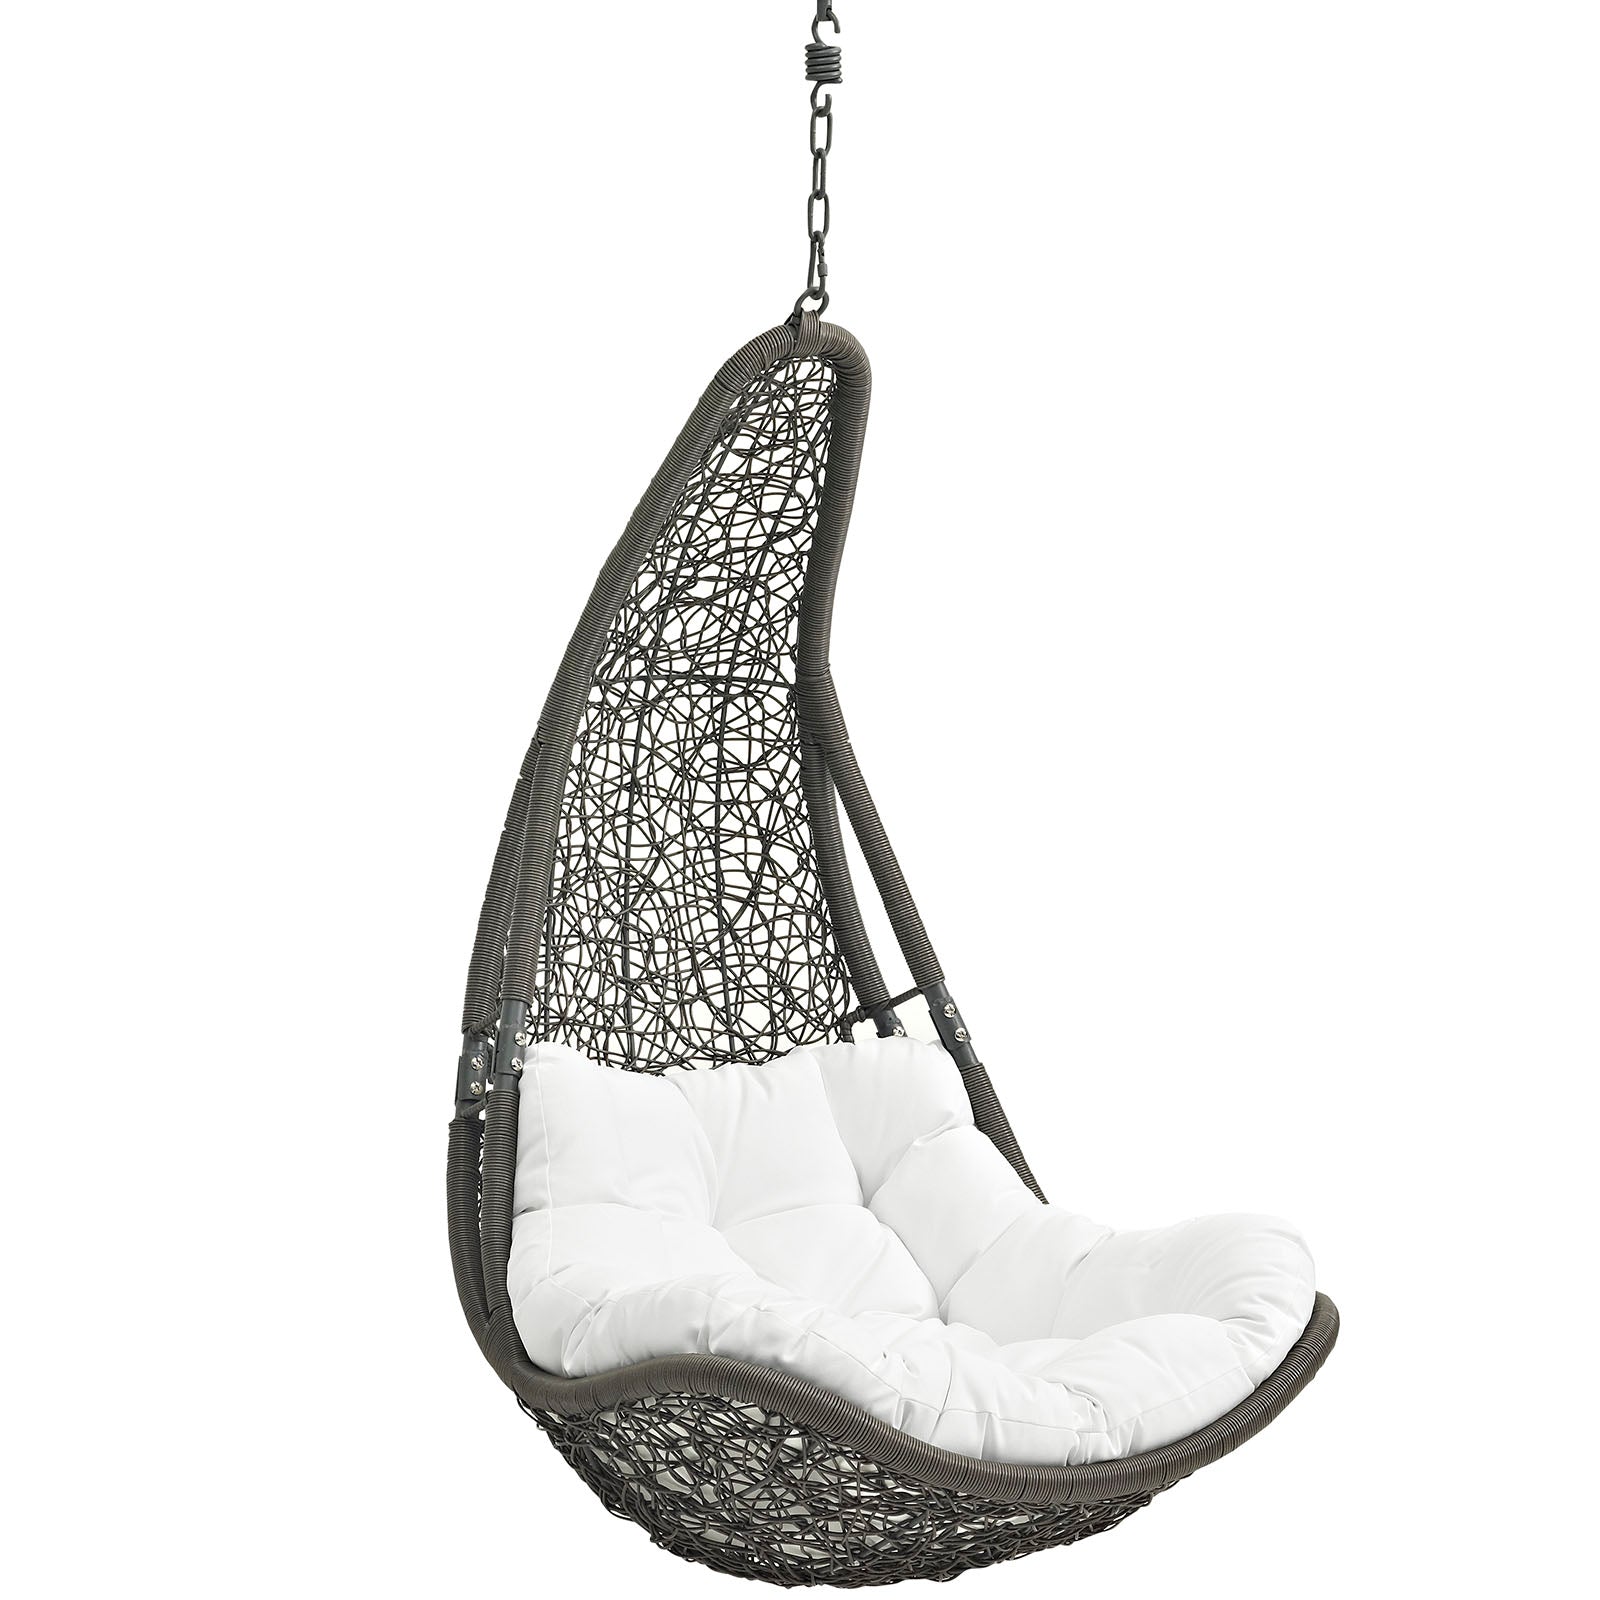 Abate Outdoor Patio Swing Chair Without Stand